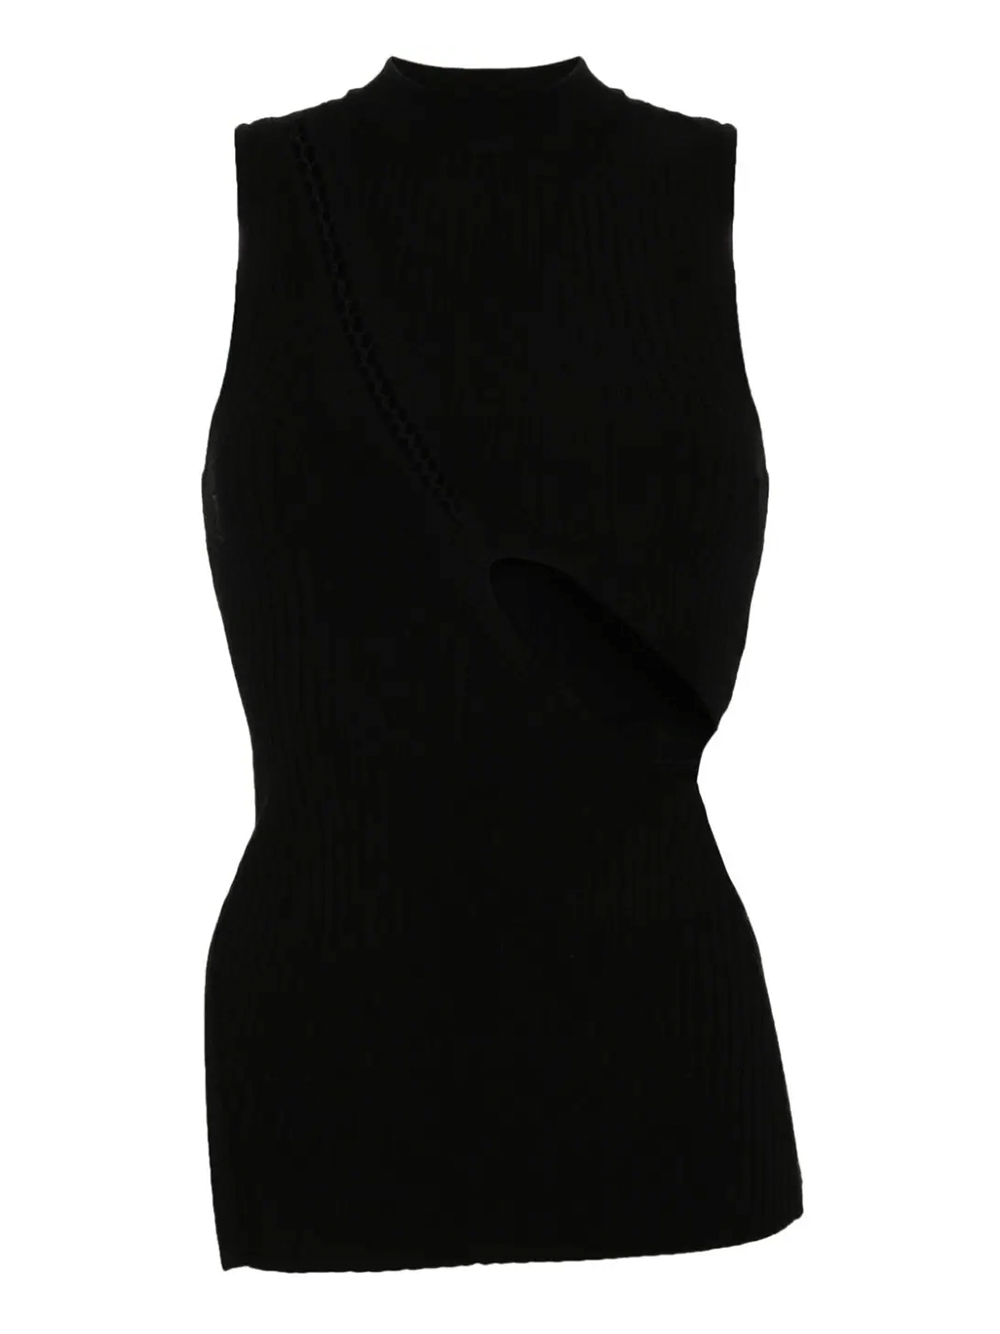 The-Attico-Knit-Top-With-Openign-Detail-Black-1